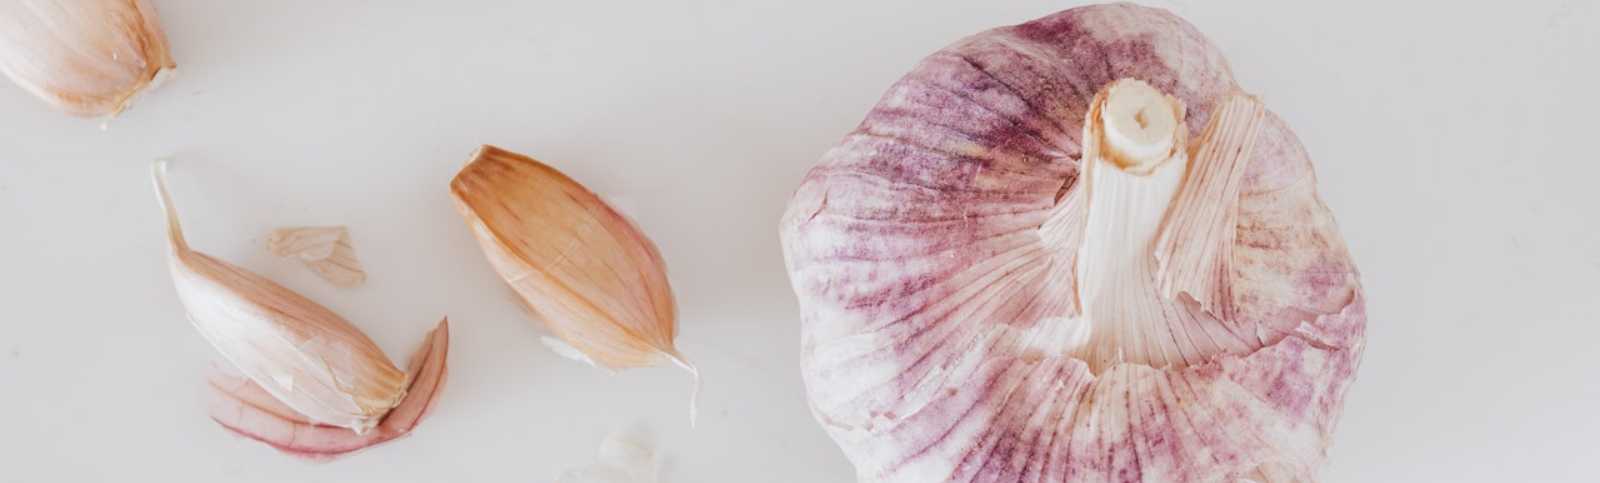 12 Crazy Facts About Garlic